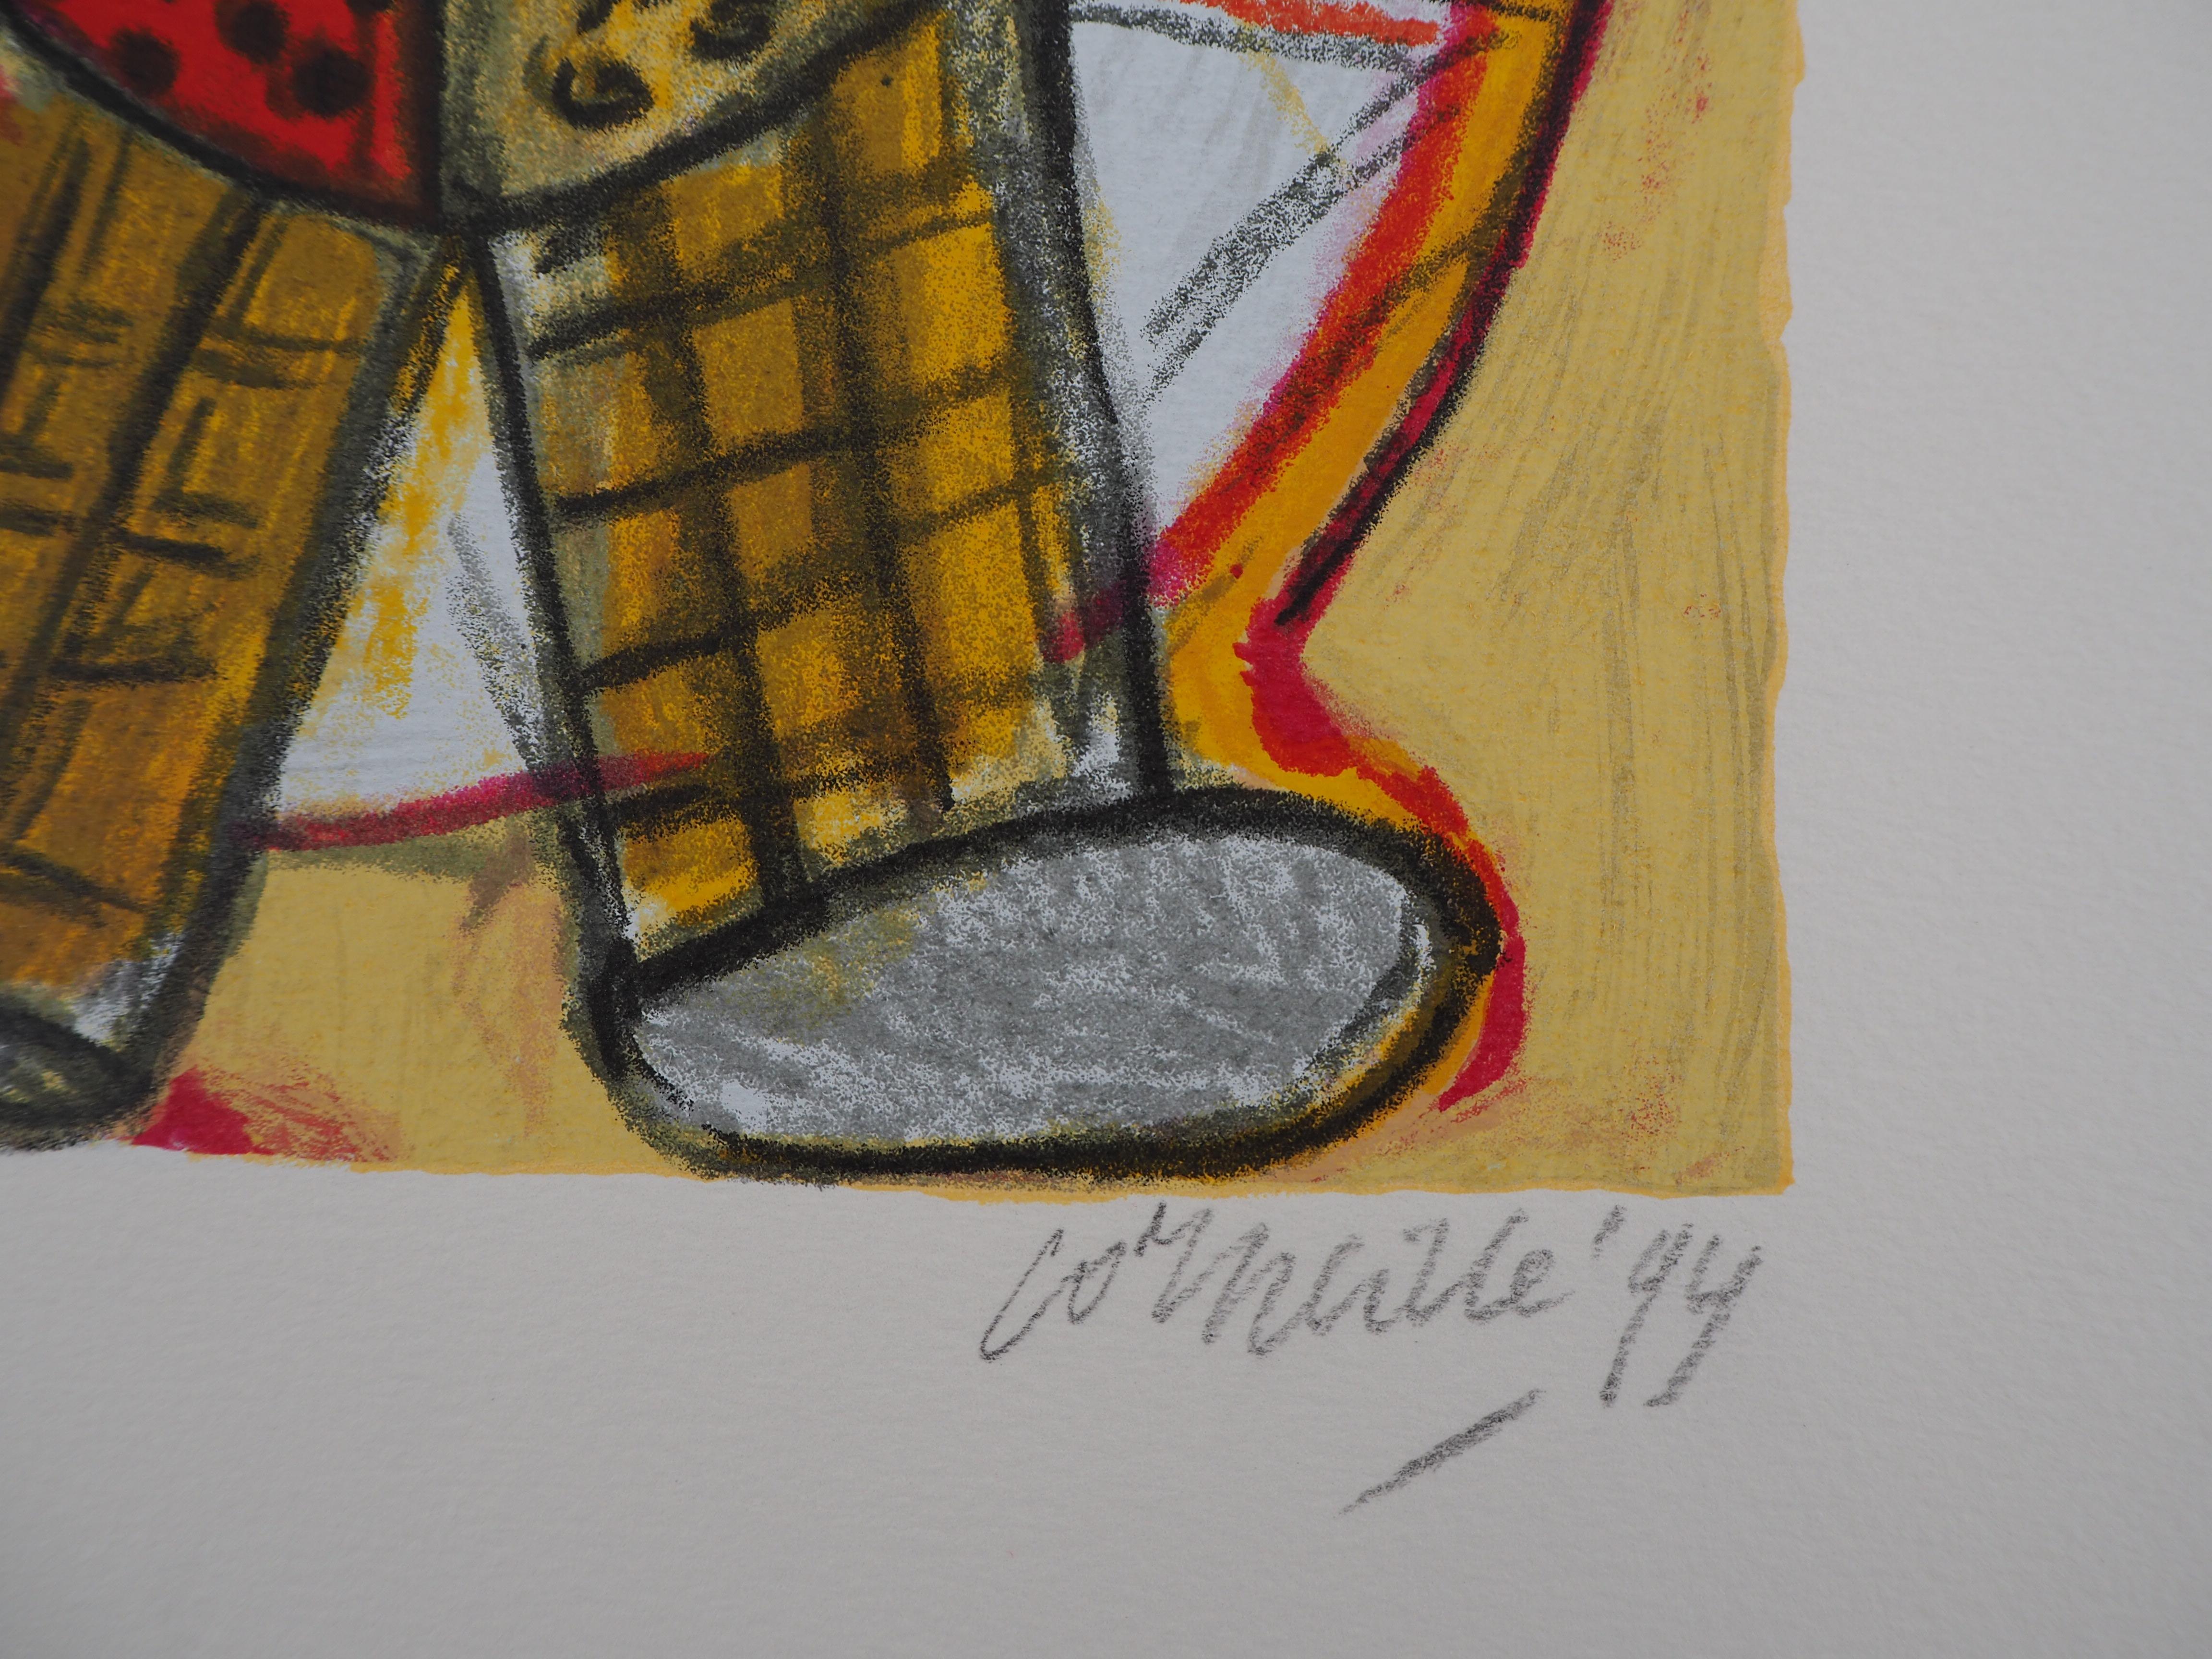 Little Clown in Red and Yellow - Original handsigned lithograph - 200 ex - Print by Corneille